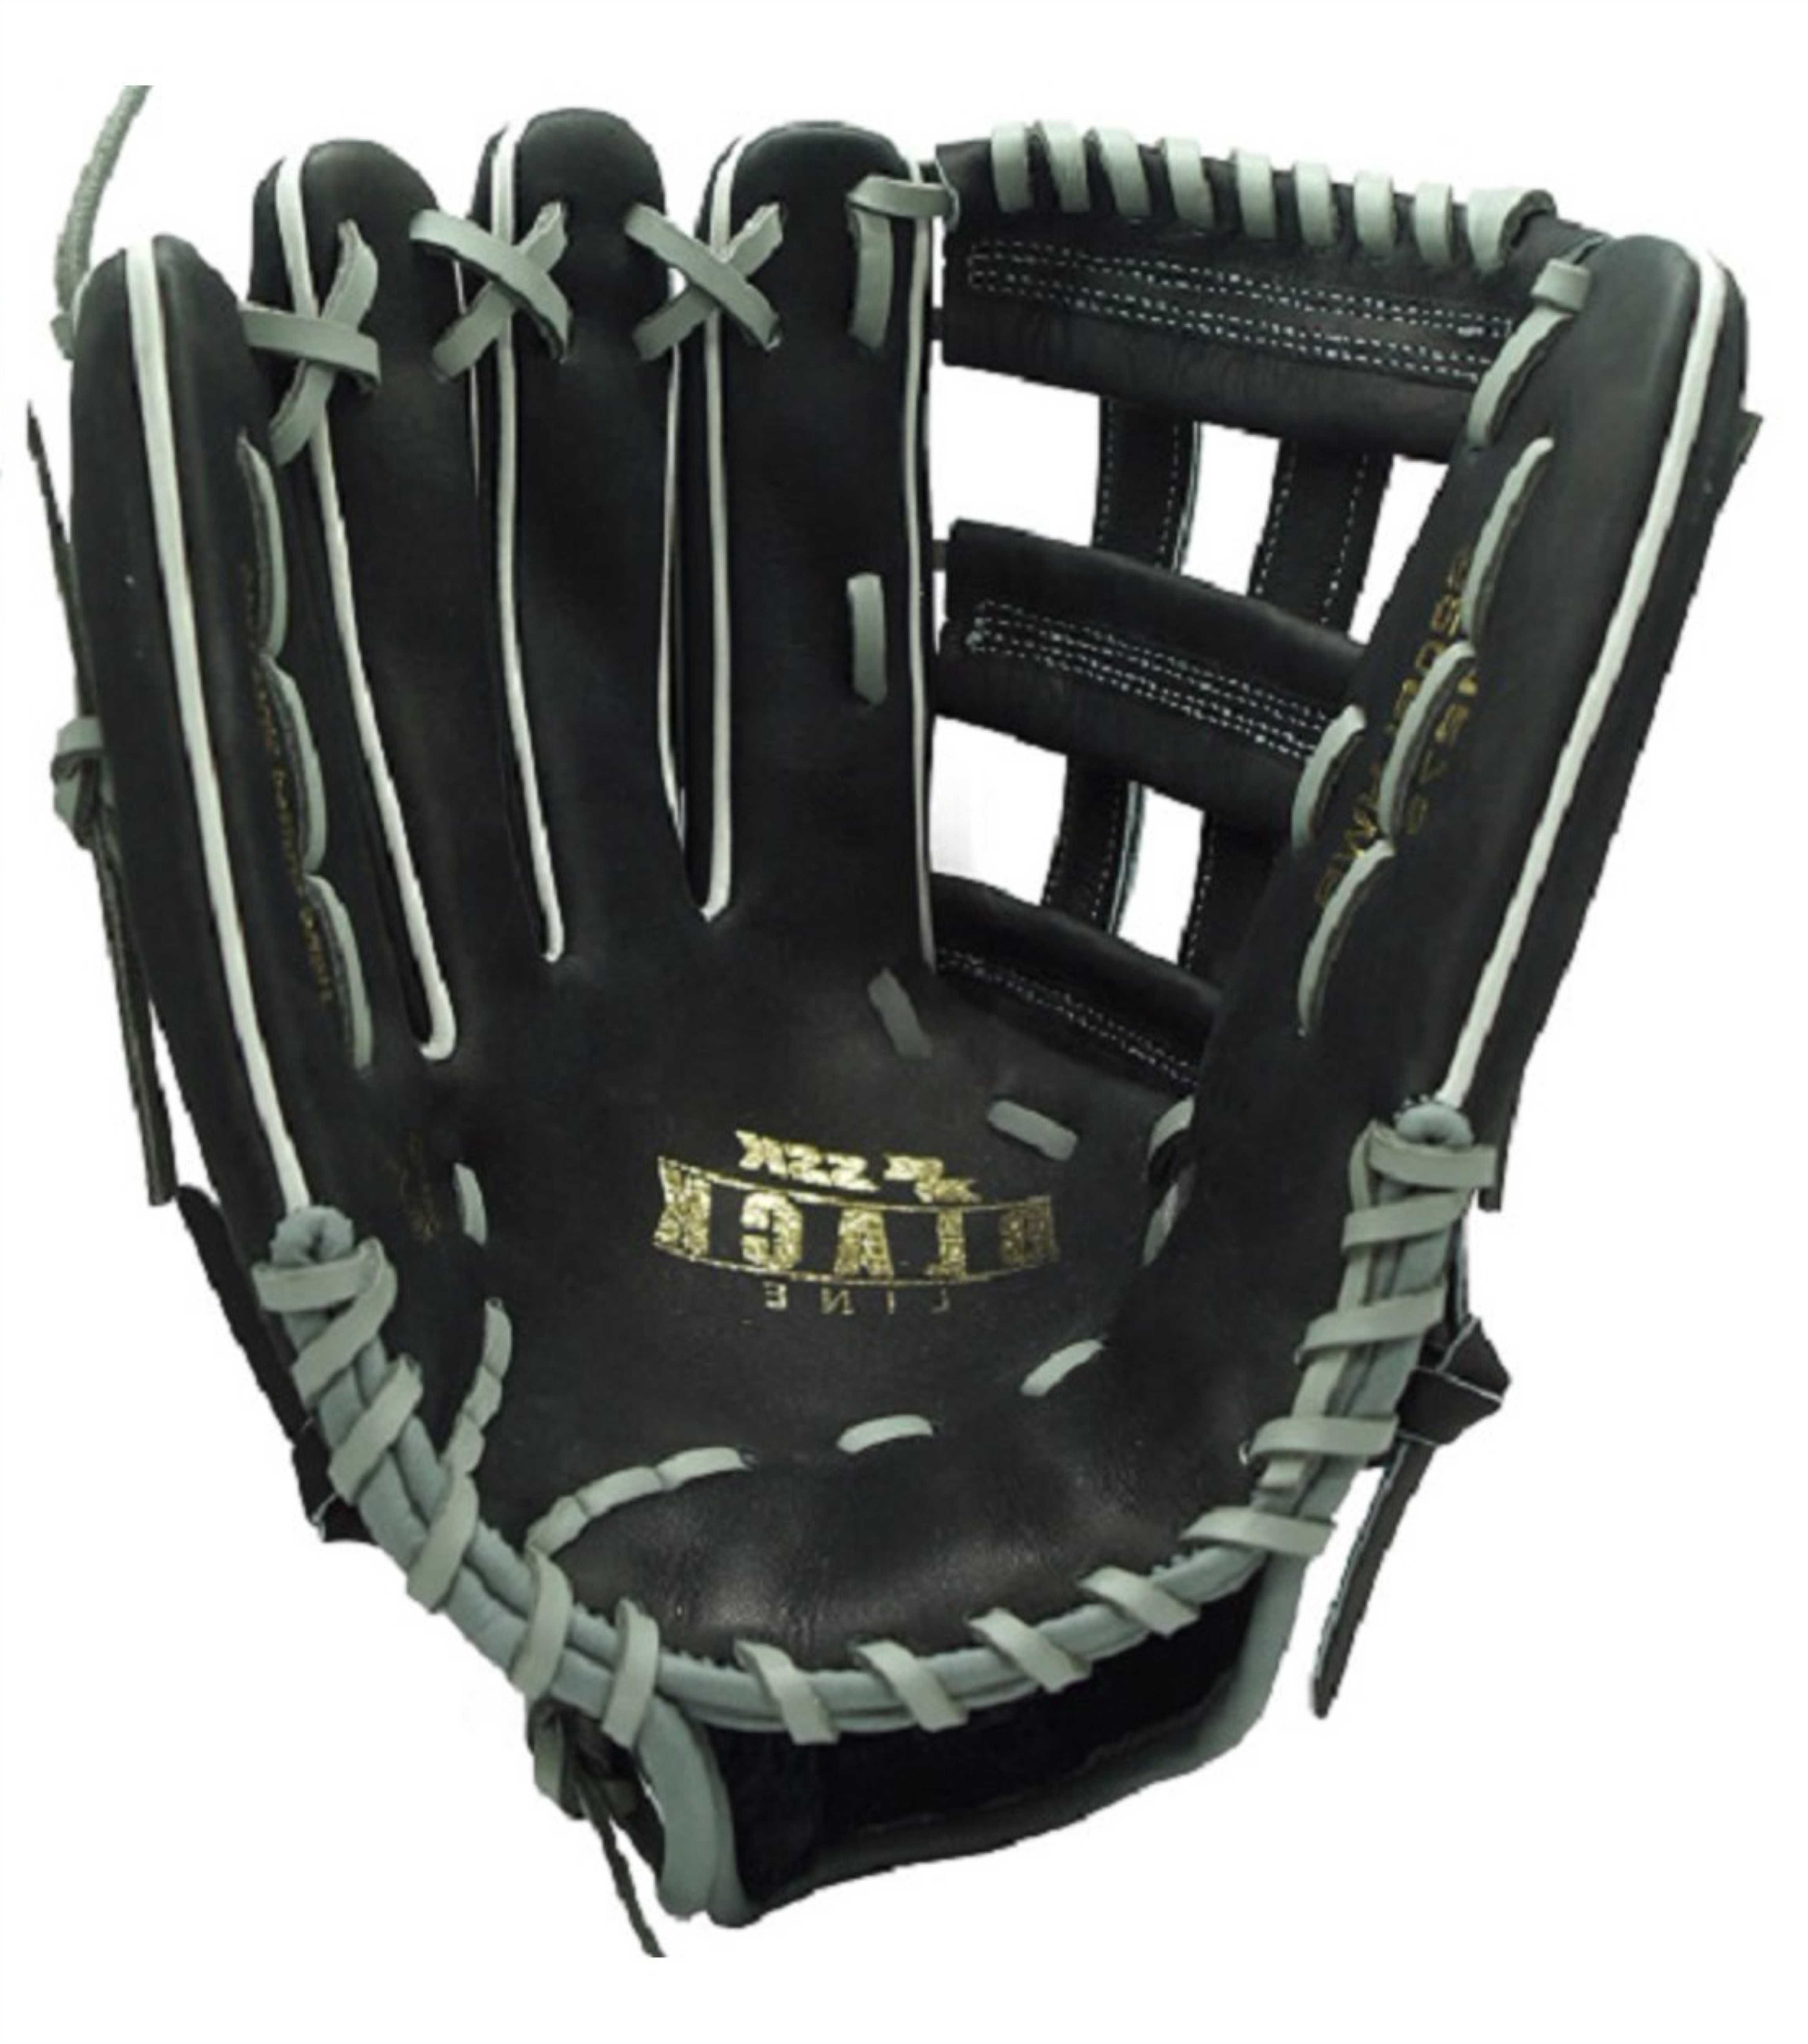 S20BLHWL - 12.75"  SSK Black Line Outfield Glove LHT